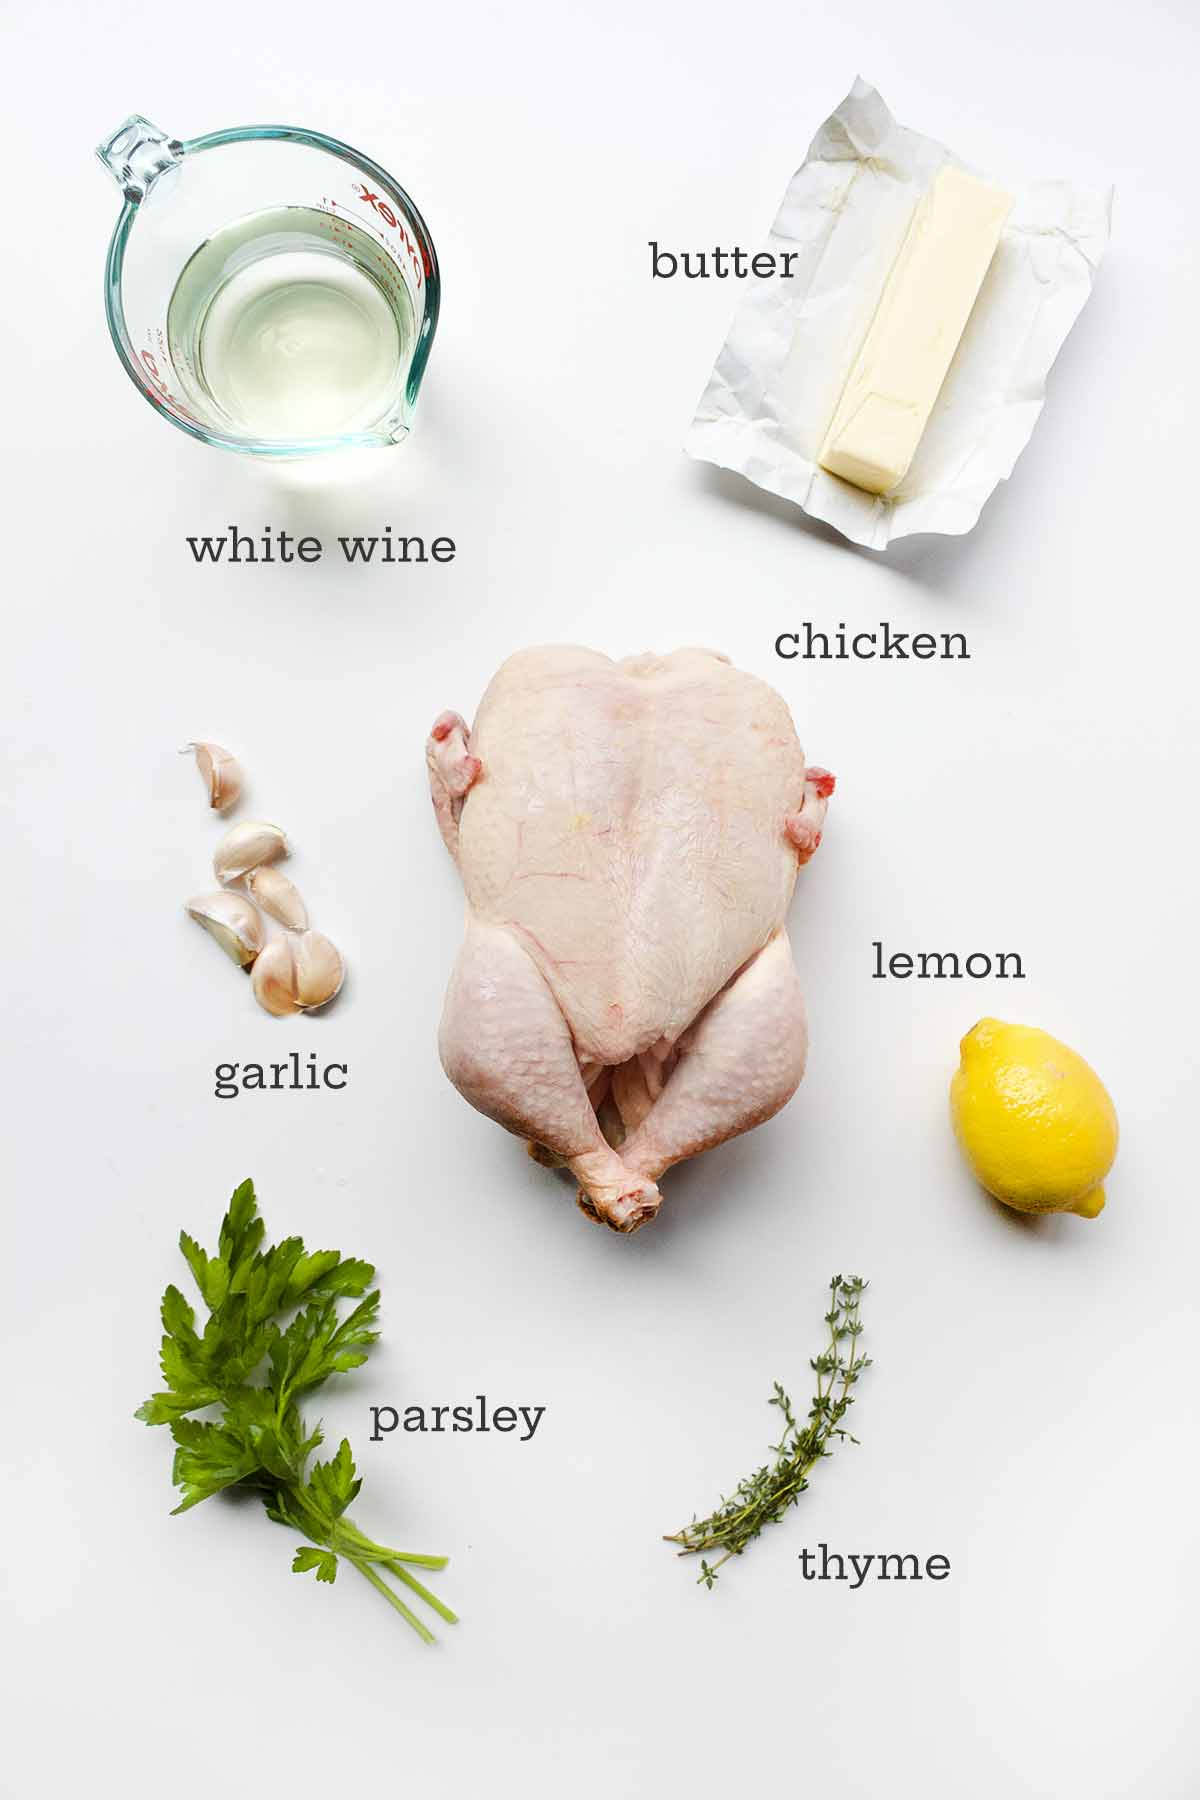 Ingredients for spatchcock roast chicken -- chicken, wine, butter, lemon, garlic, parsley, and thyme.